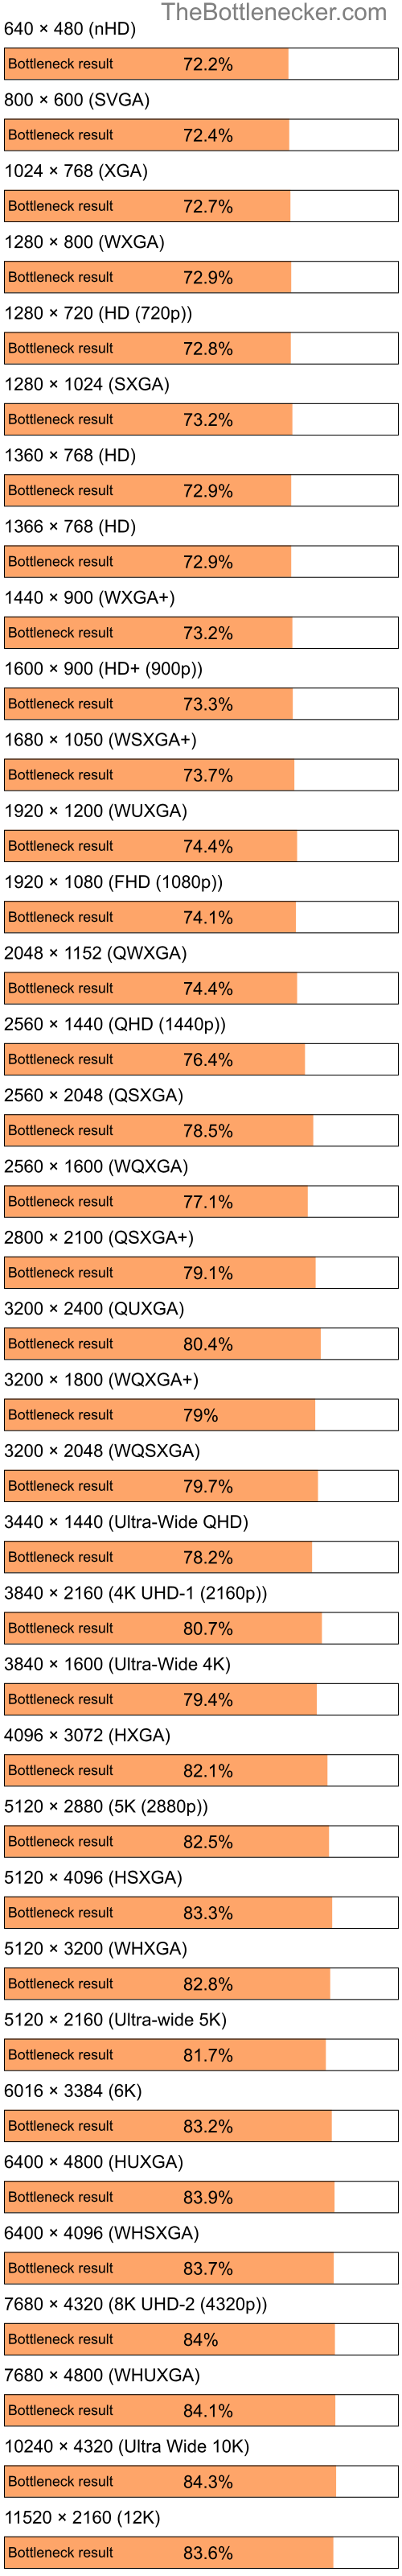 Bottleneck results by resolution for Intel Celeron and AMD Mobility Radeon X1400 in General Tasks